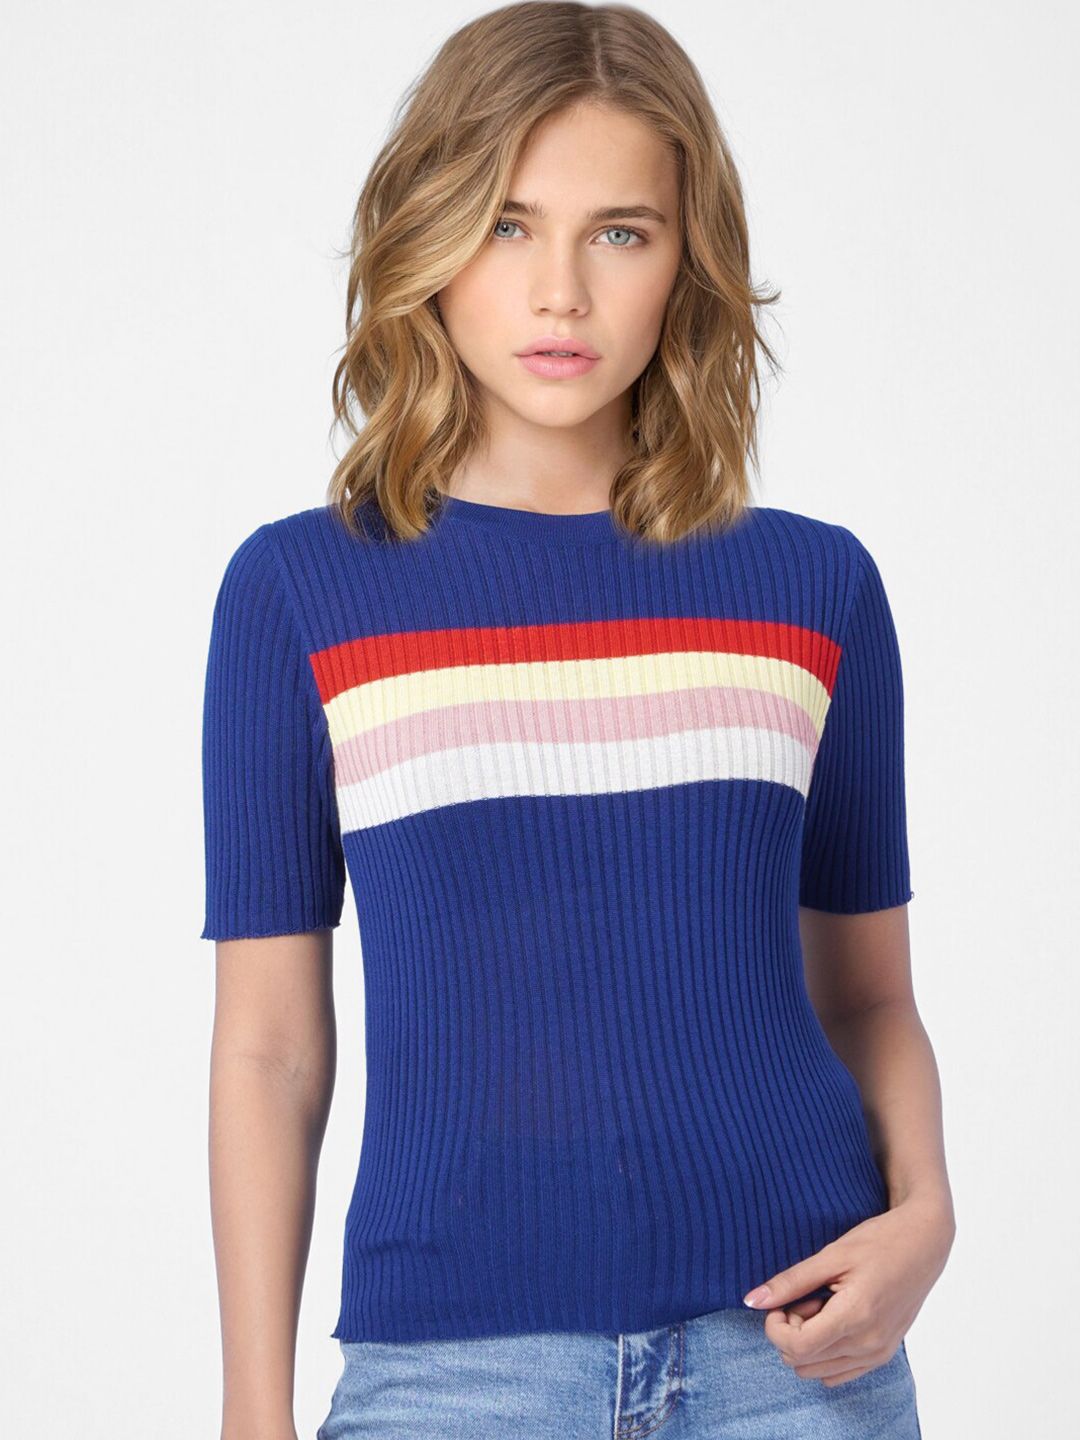 ONLY Women Blue Striped Top Price in India